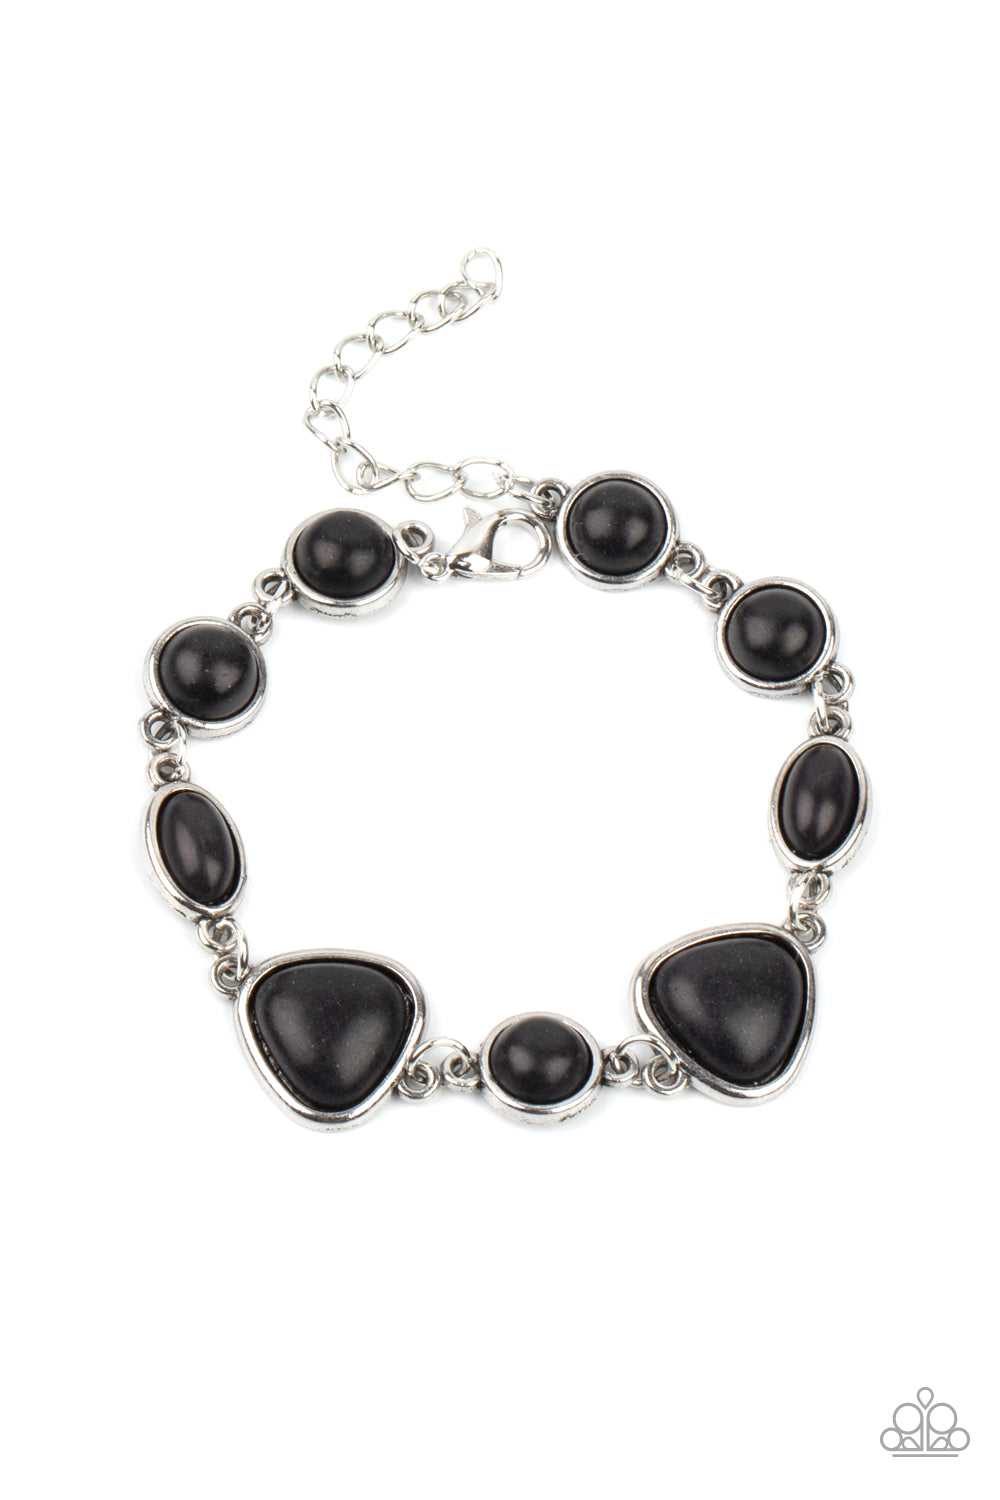 Eco-Friendly Fashionista - Black Stone - Silver Bracelet - Paparazzi Accessories - Encased in sleek silver frames, a collection of round, oval, and triangular black stones delicately link around the wrist for a one-of-a-kind look with an artisan feel. Features an adjustable clasp closure. Sold as one individual stylish earthy bracelet .